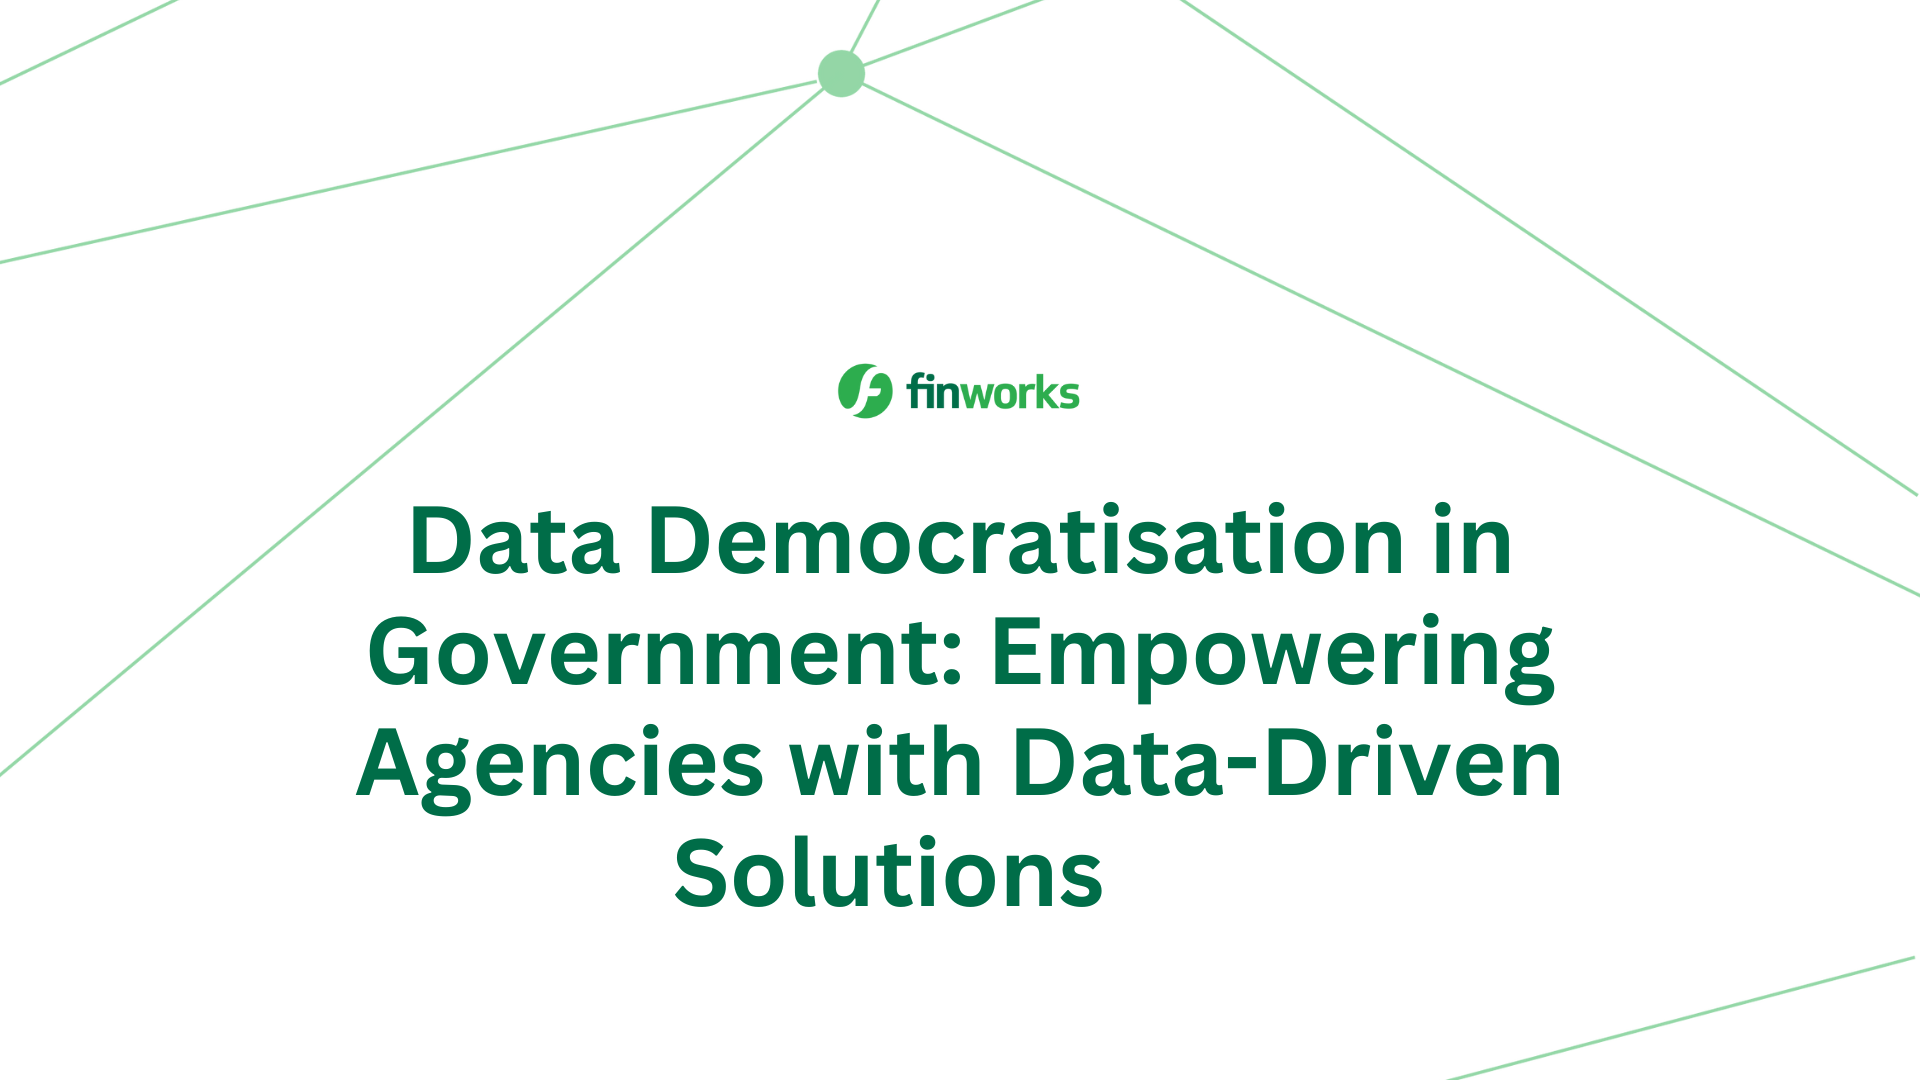 Data Democratisation in Government: Empowering Agencies with Data-Driven Solutions 